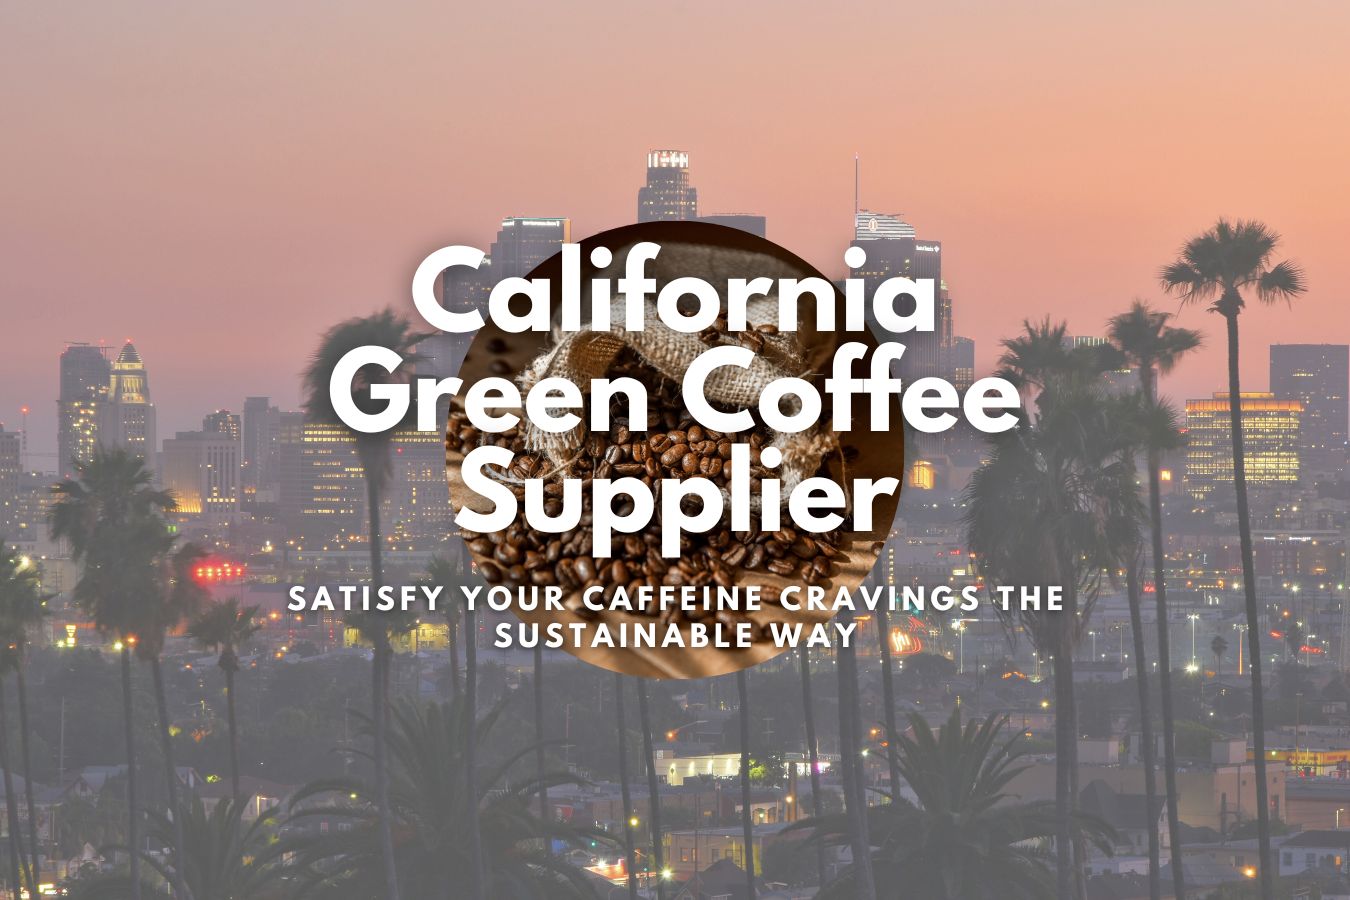 California Green Coffee Supplier Satisfy Your Caffeine Cravings the Sustainable Way